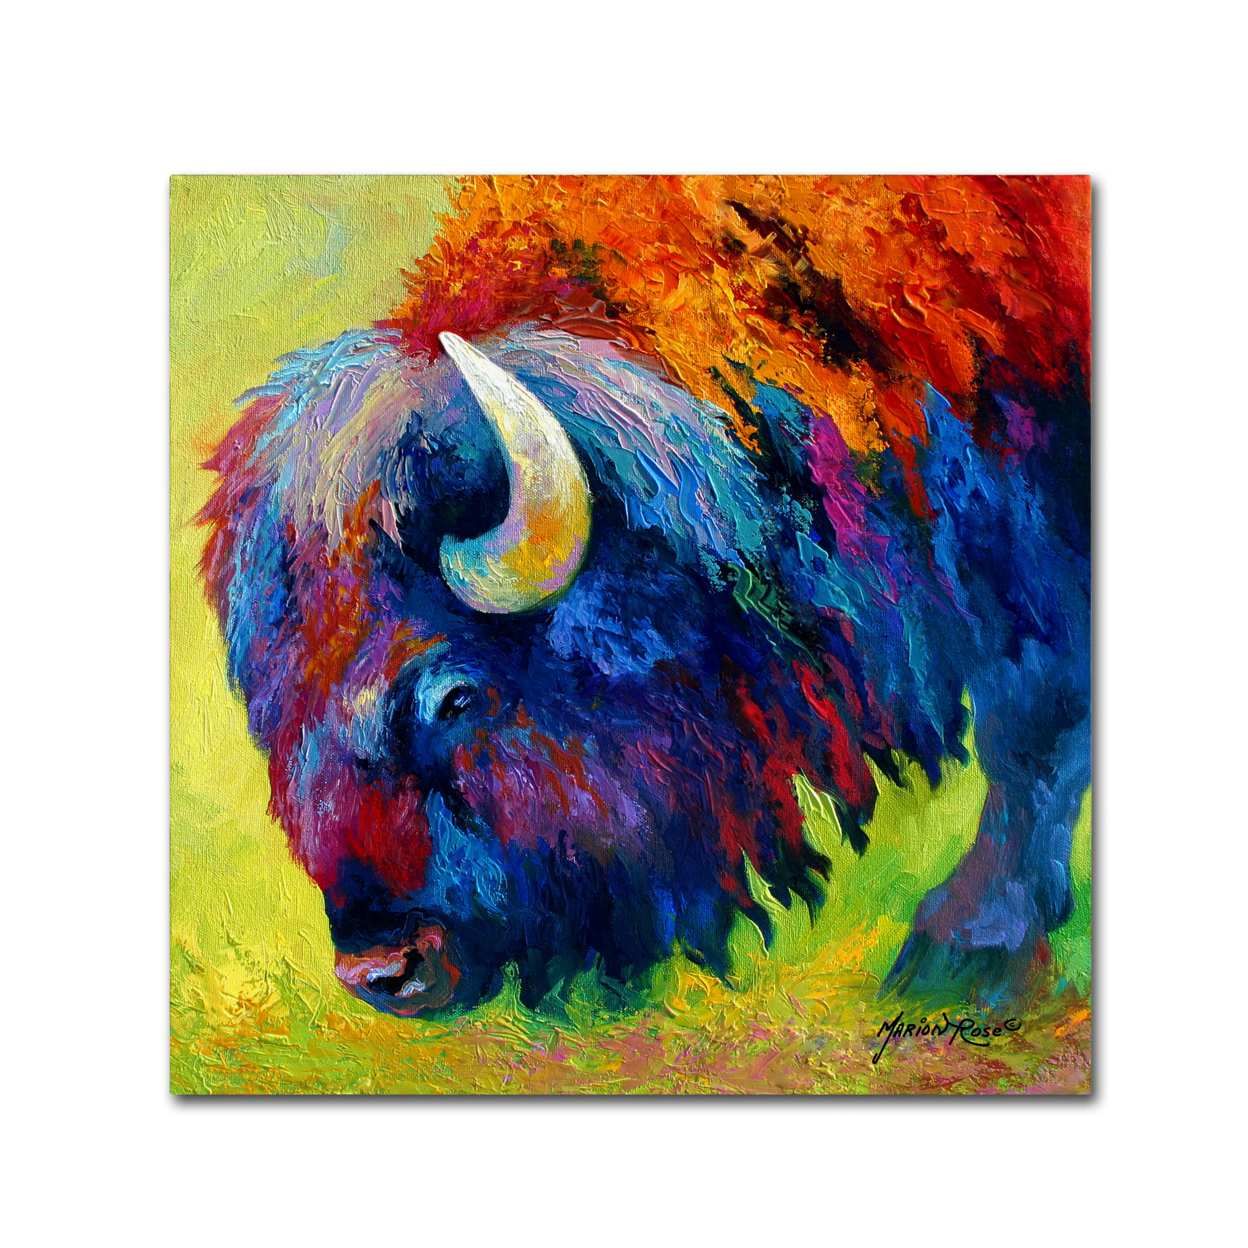 Marion Rose 'Bison Portrait II' Ready To Hang Canvas Art 24 X 24 Inches Made In USA